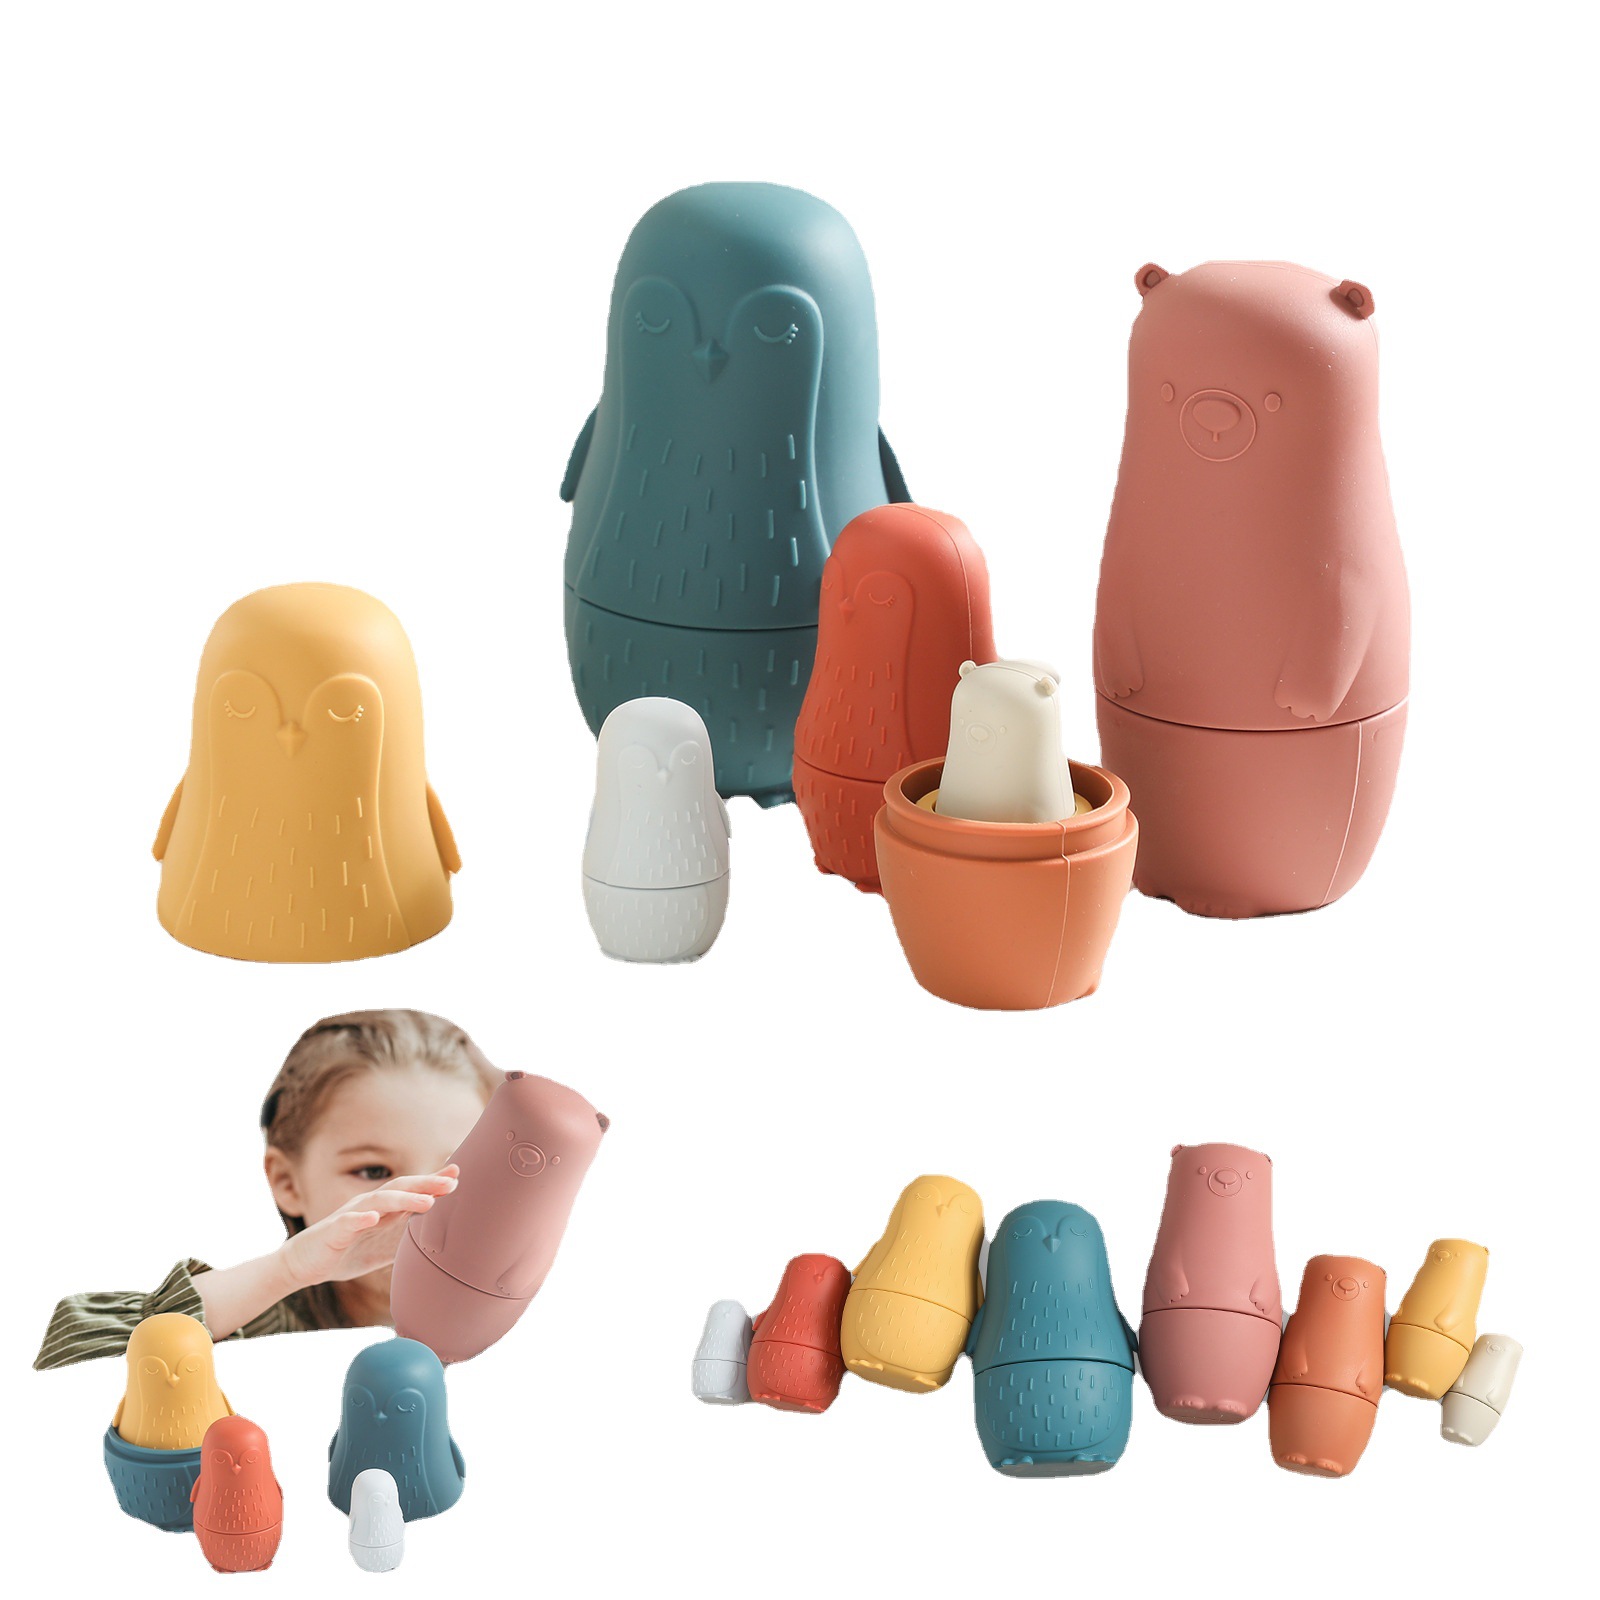 silicone russia nesting dolls, silicone building baby blocks teether,squeeze silicone soft building blocks